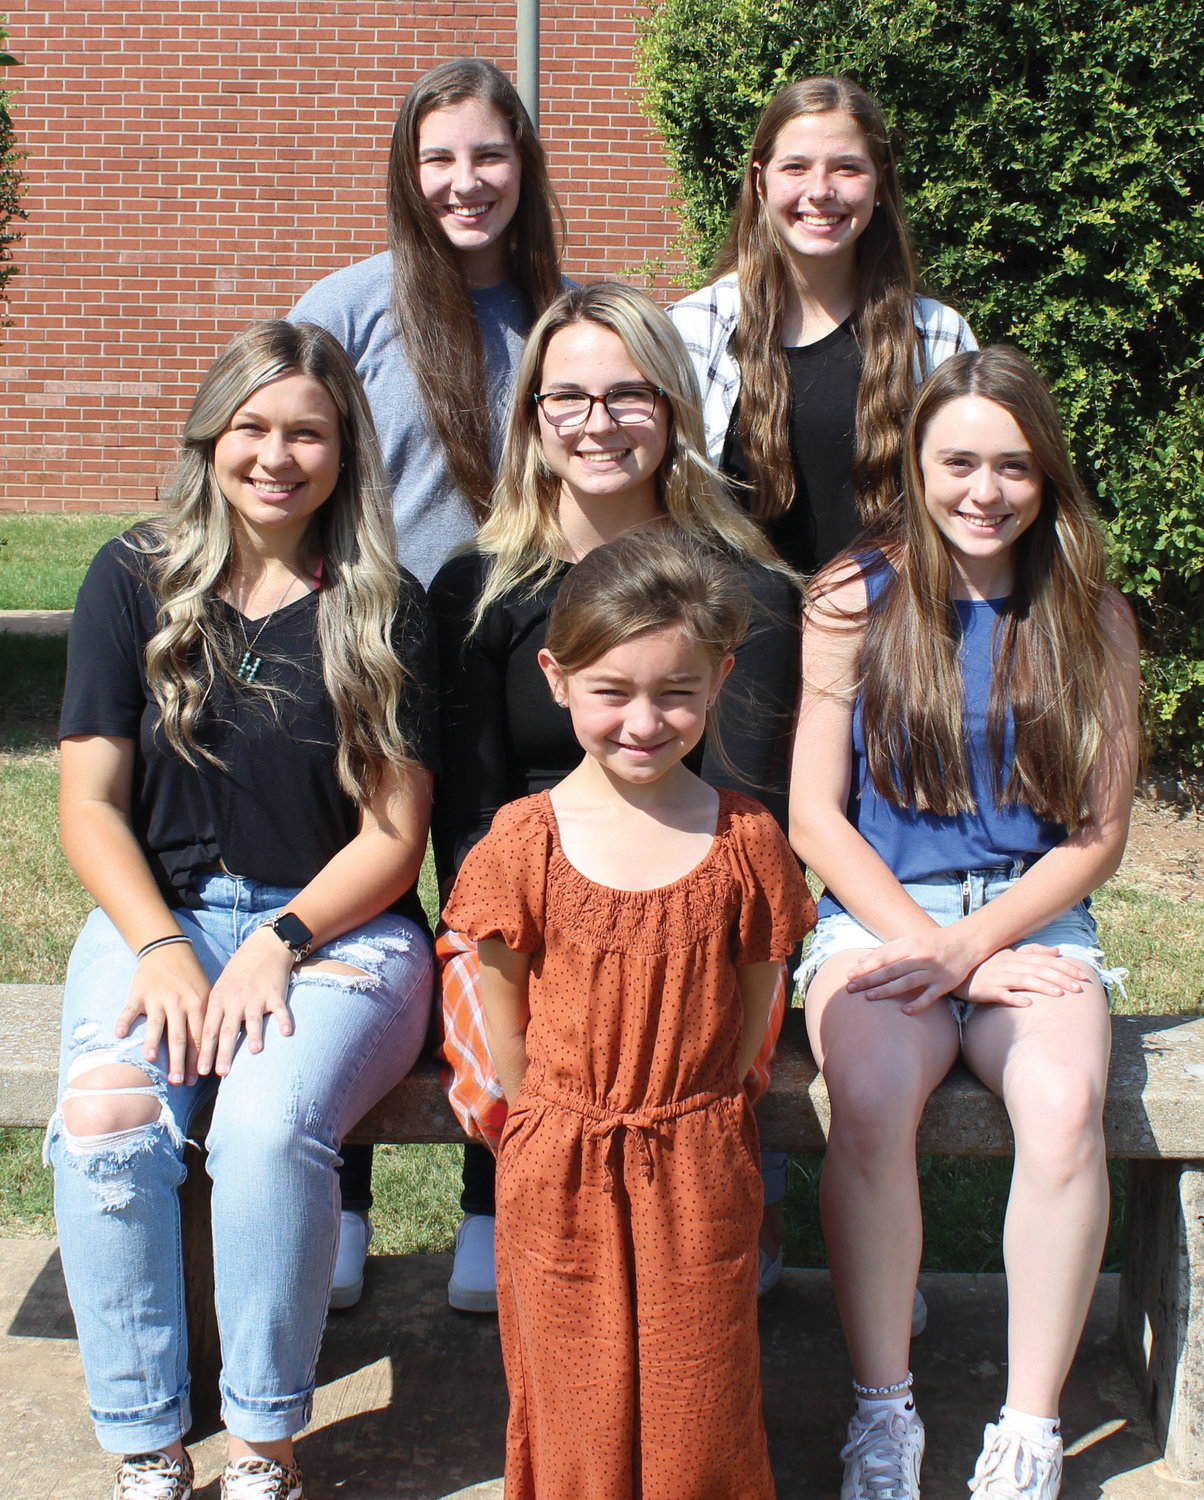 Wayne High School will name its queen before Friday’s homecoming game against the Wynnewood Savages. The queen candidates are, seated from left, Haiden Parker, Hannah VanSchuyver and Mckenzie Fisher. Attendants are, standing from left, Kaylee Madden and Haylee Durrence. Center front is the flower girl, Addison Martin.